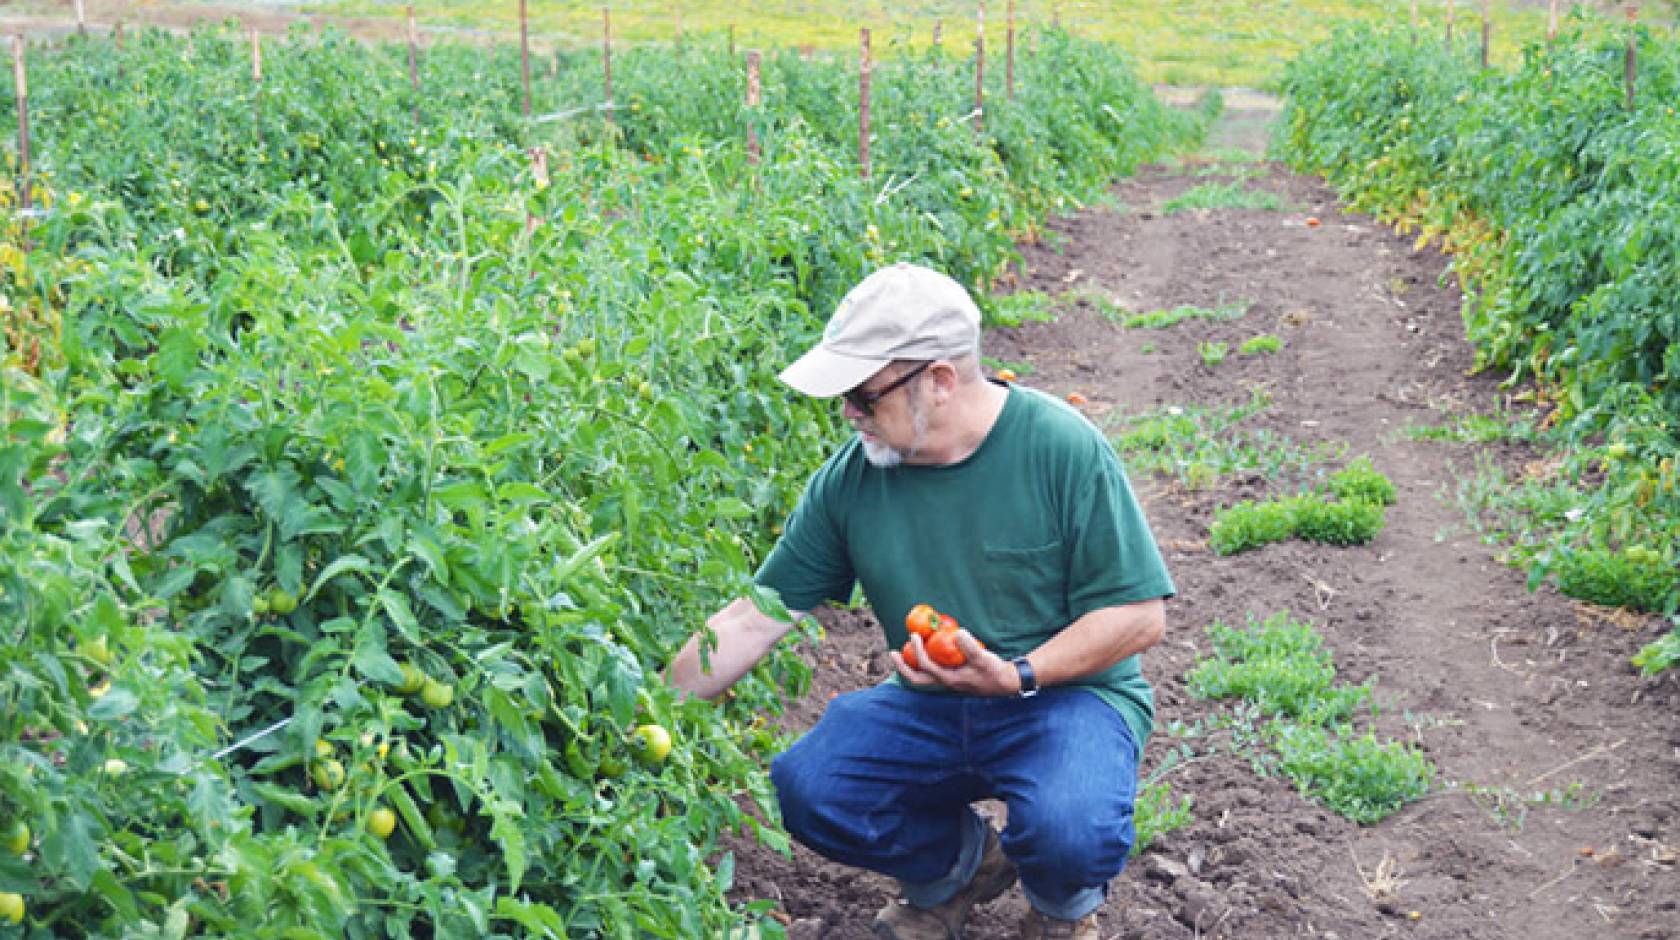 UC Santa Cruz alumnus and current CASFS researcher Mark Lipson was honored for his years of service to the organic and sustainable agriculture movement.